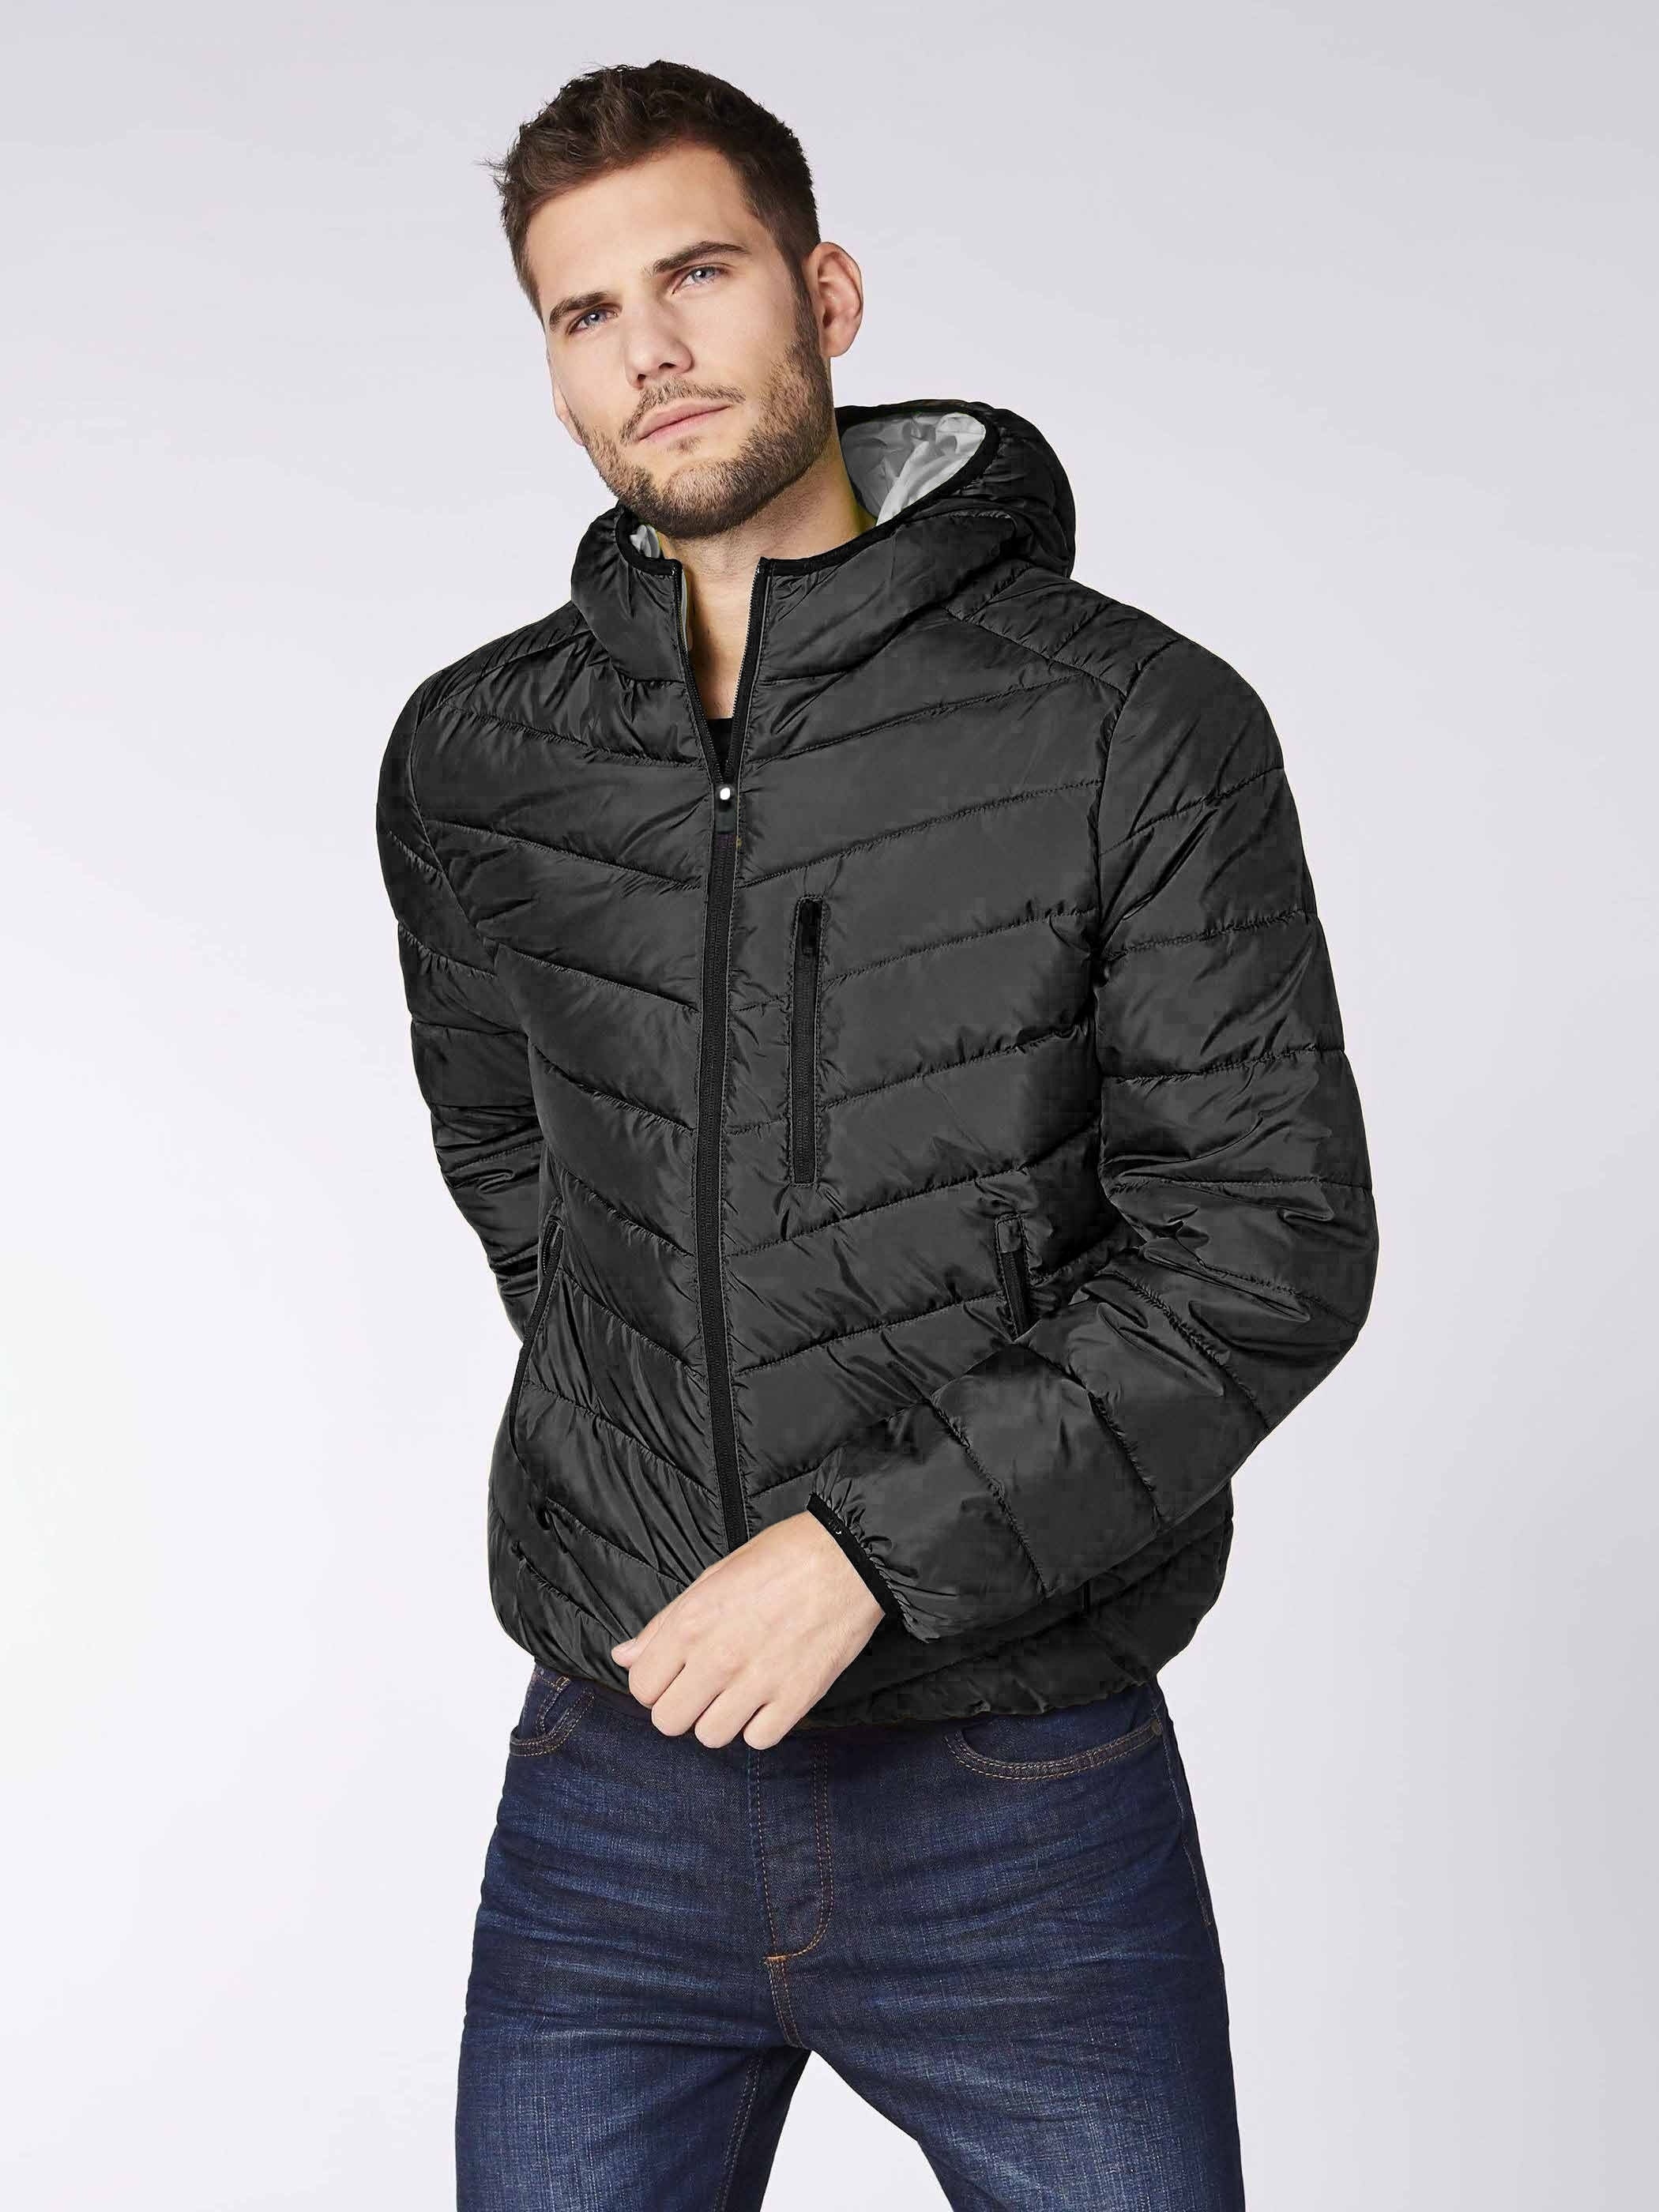 Men's Plus Size Solid Chevron Hooded Puffer Coat For Winter, Oversized Thick Padded Outwear For Big & Tall Males, Men's Clothing